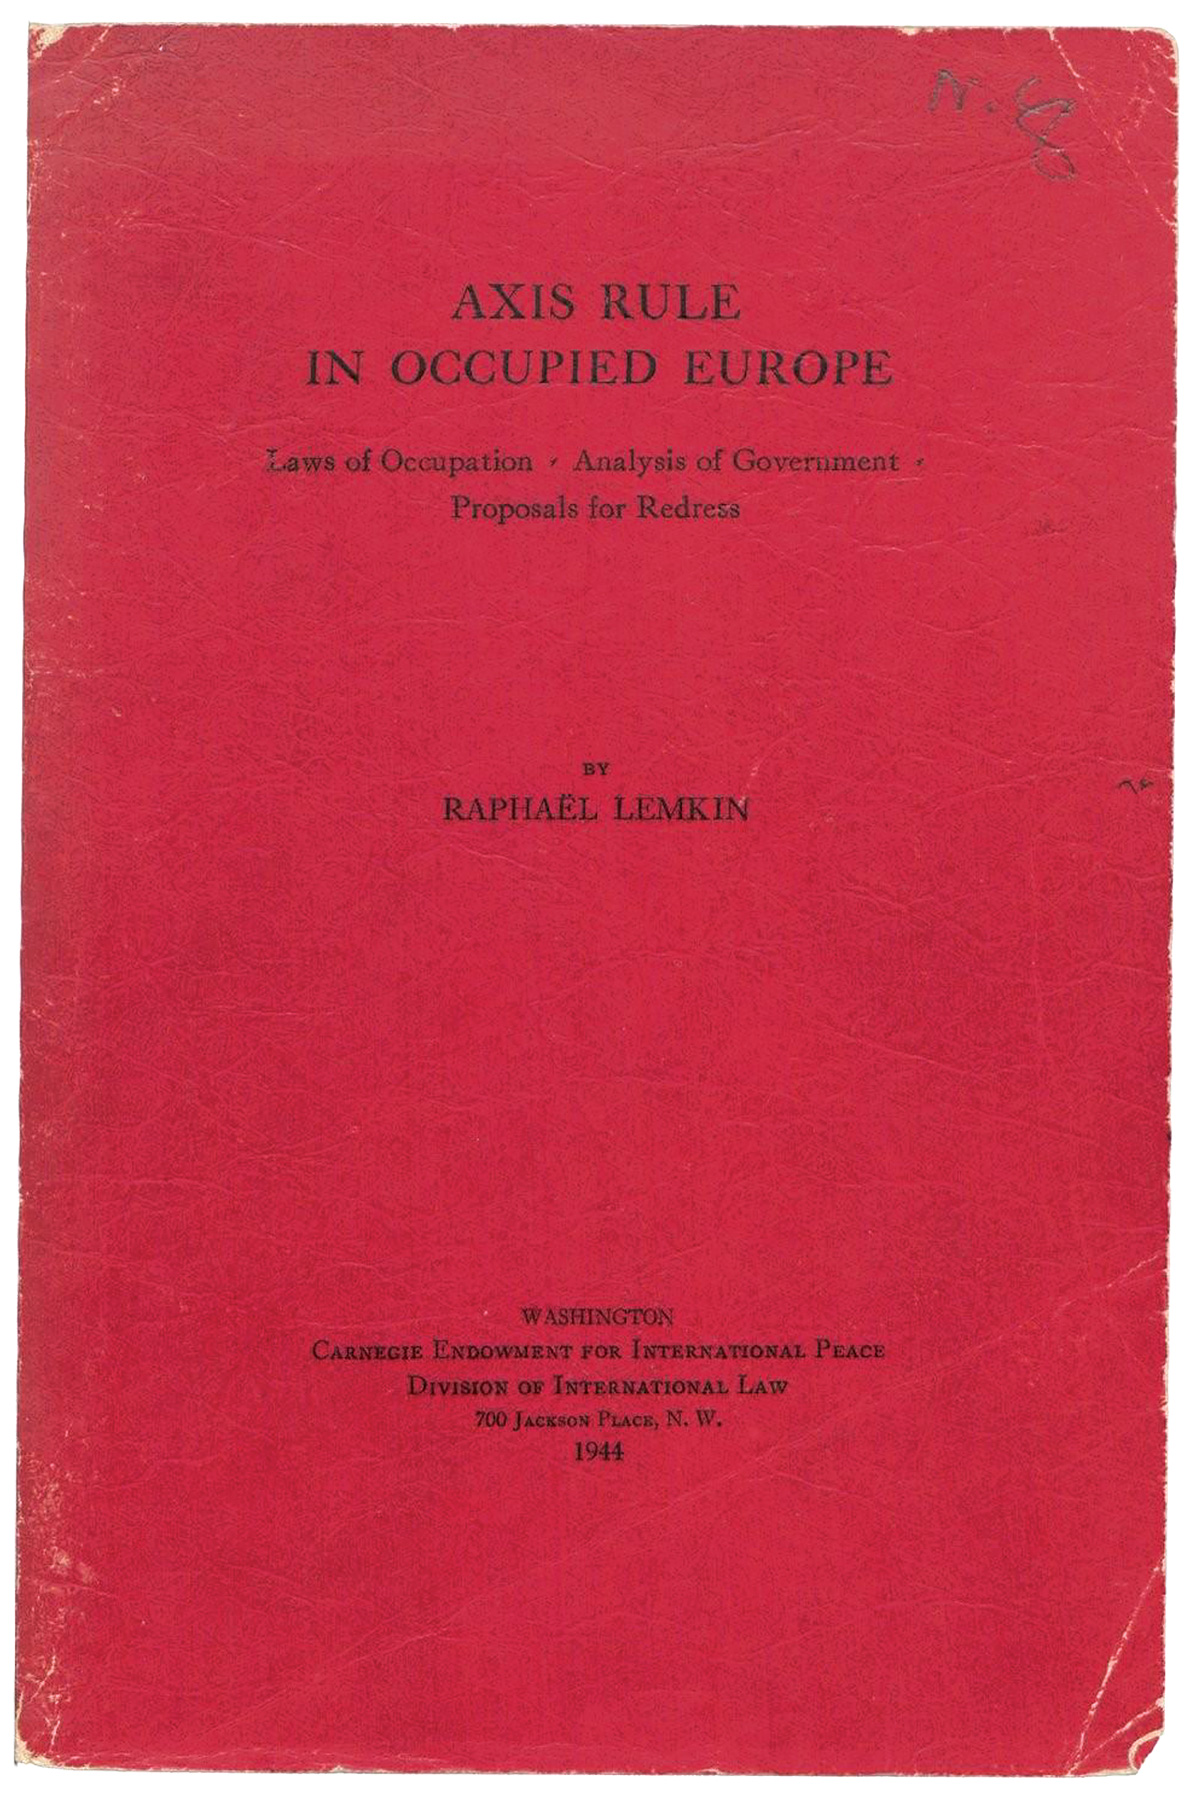 Cover of the book Axis Rule in Occupied Europe